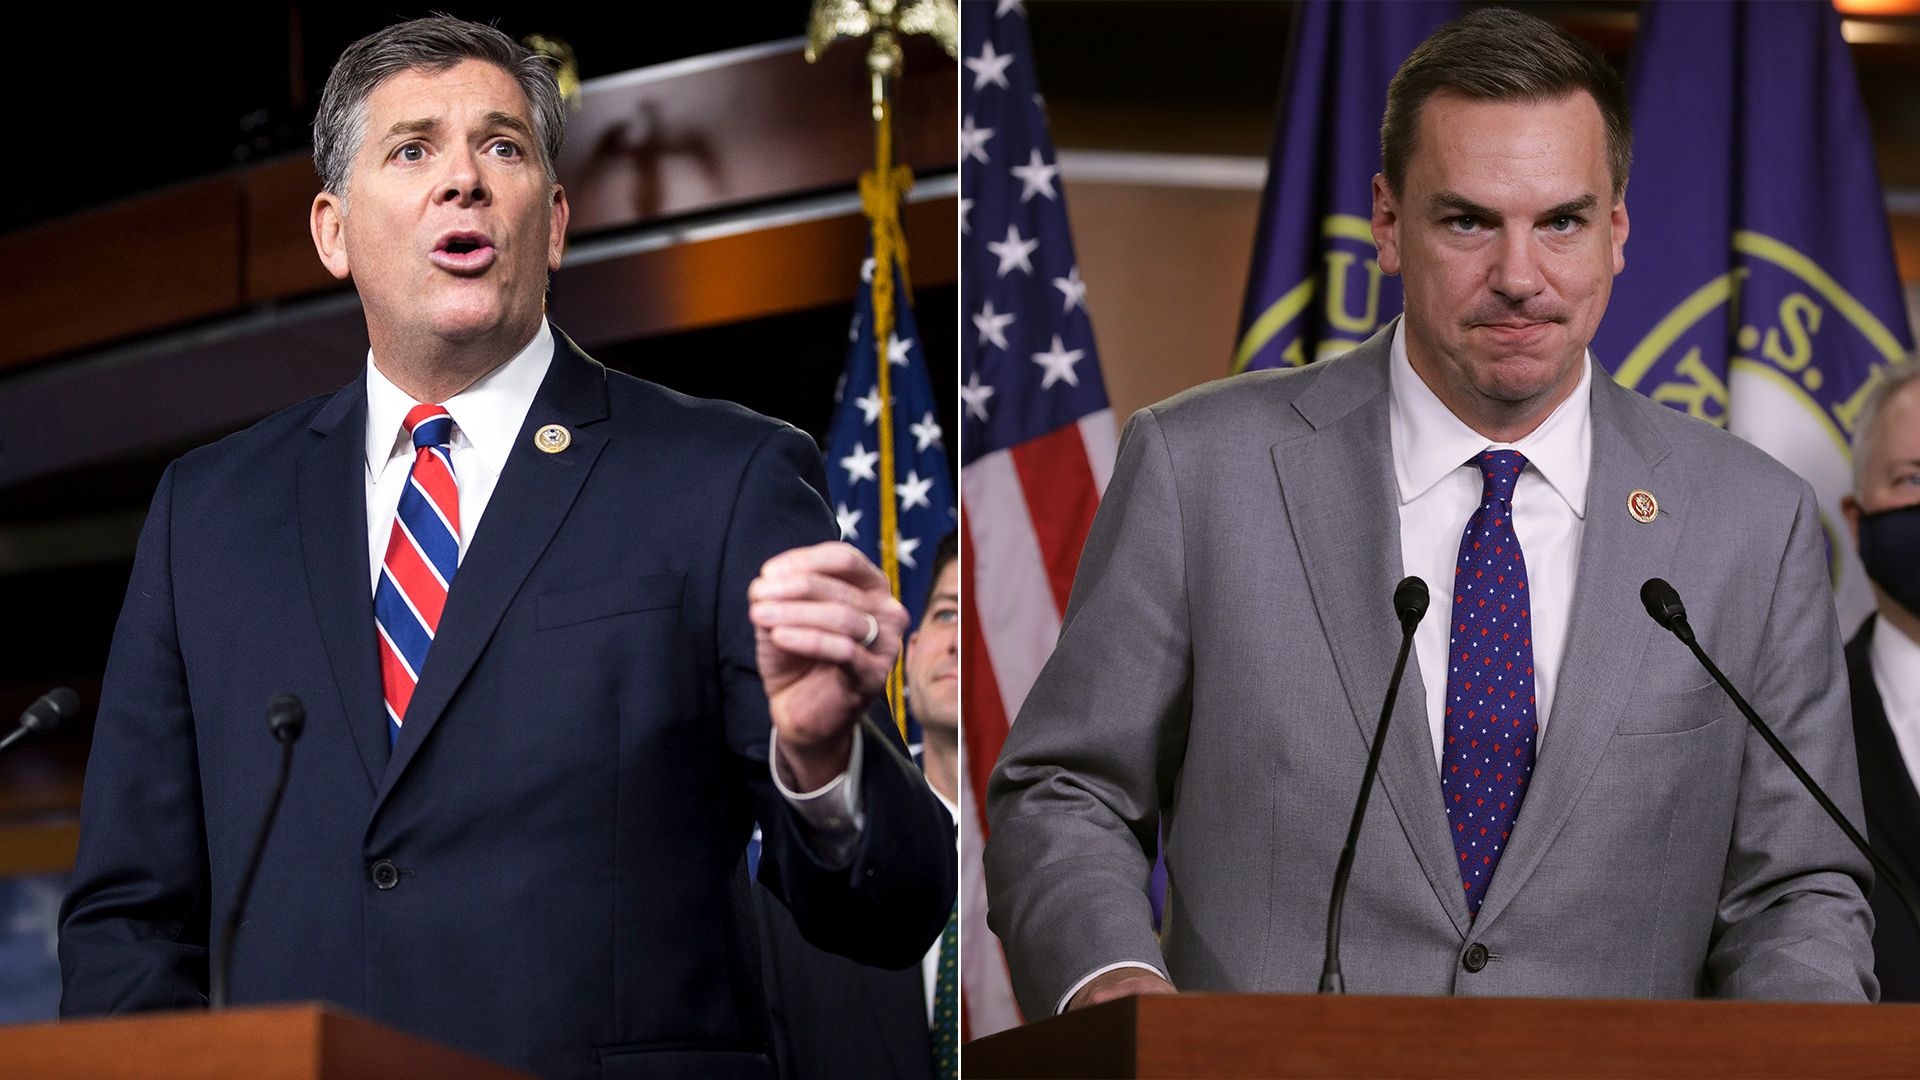 Reps. Darin LaHood and Richard Hudson are seen in a side-by-side photo array.